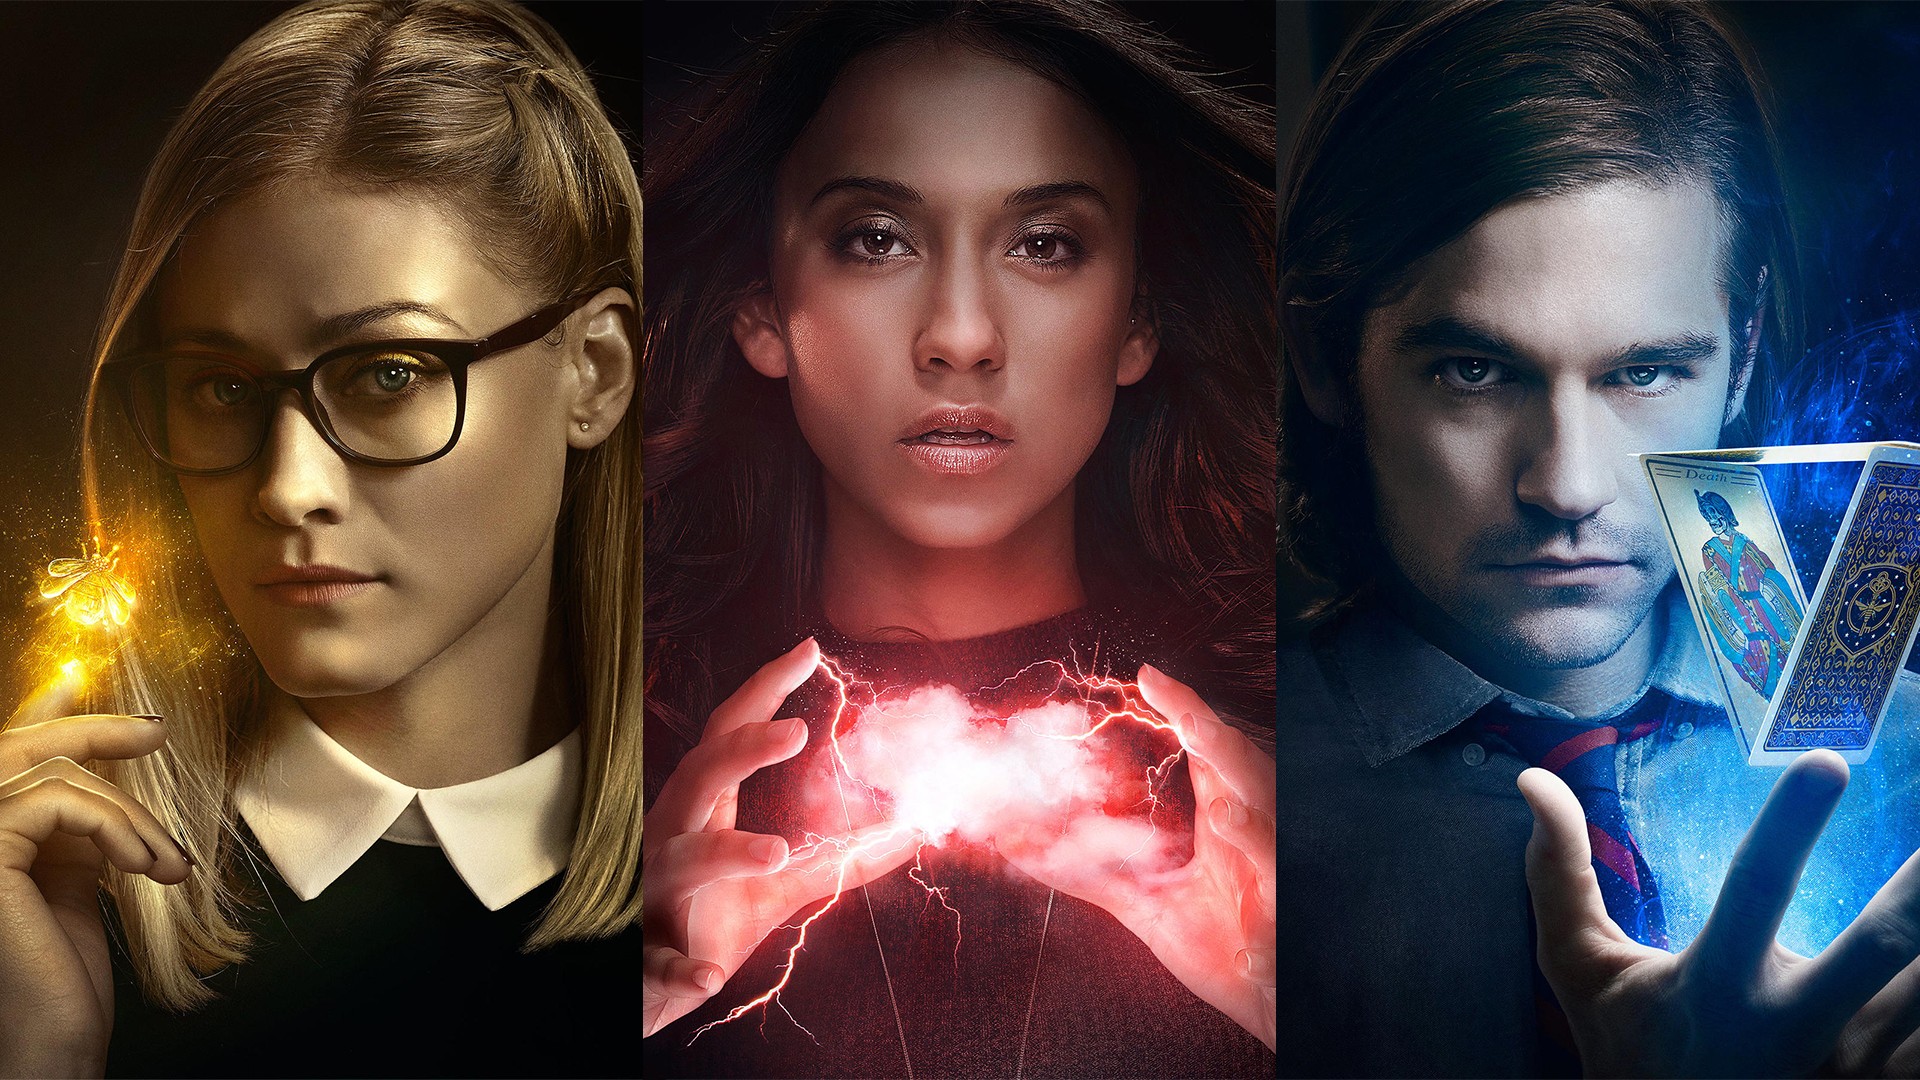 General 1920x1080 The Magicians collage women with glasses men magic Olivia Taylor Dudley Stella Maeve TV series face Jason Ralph